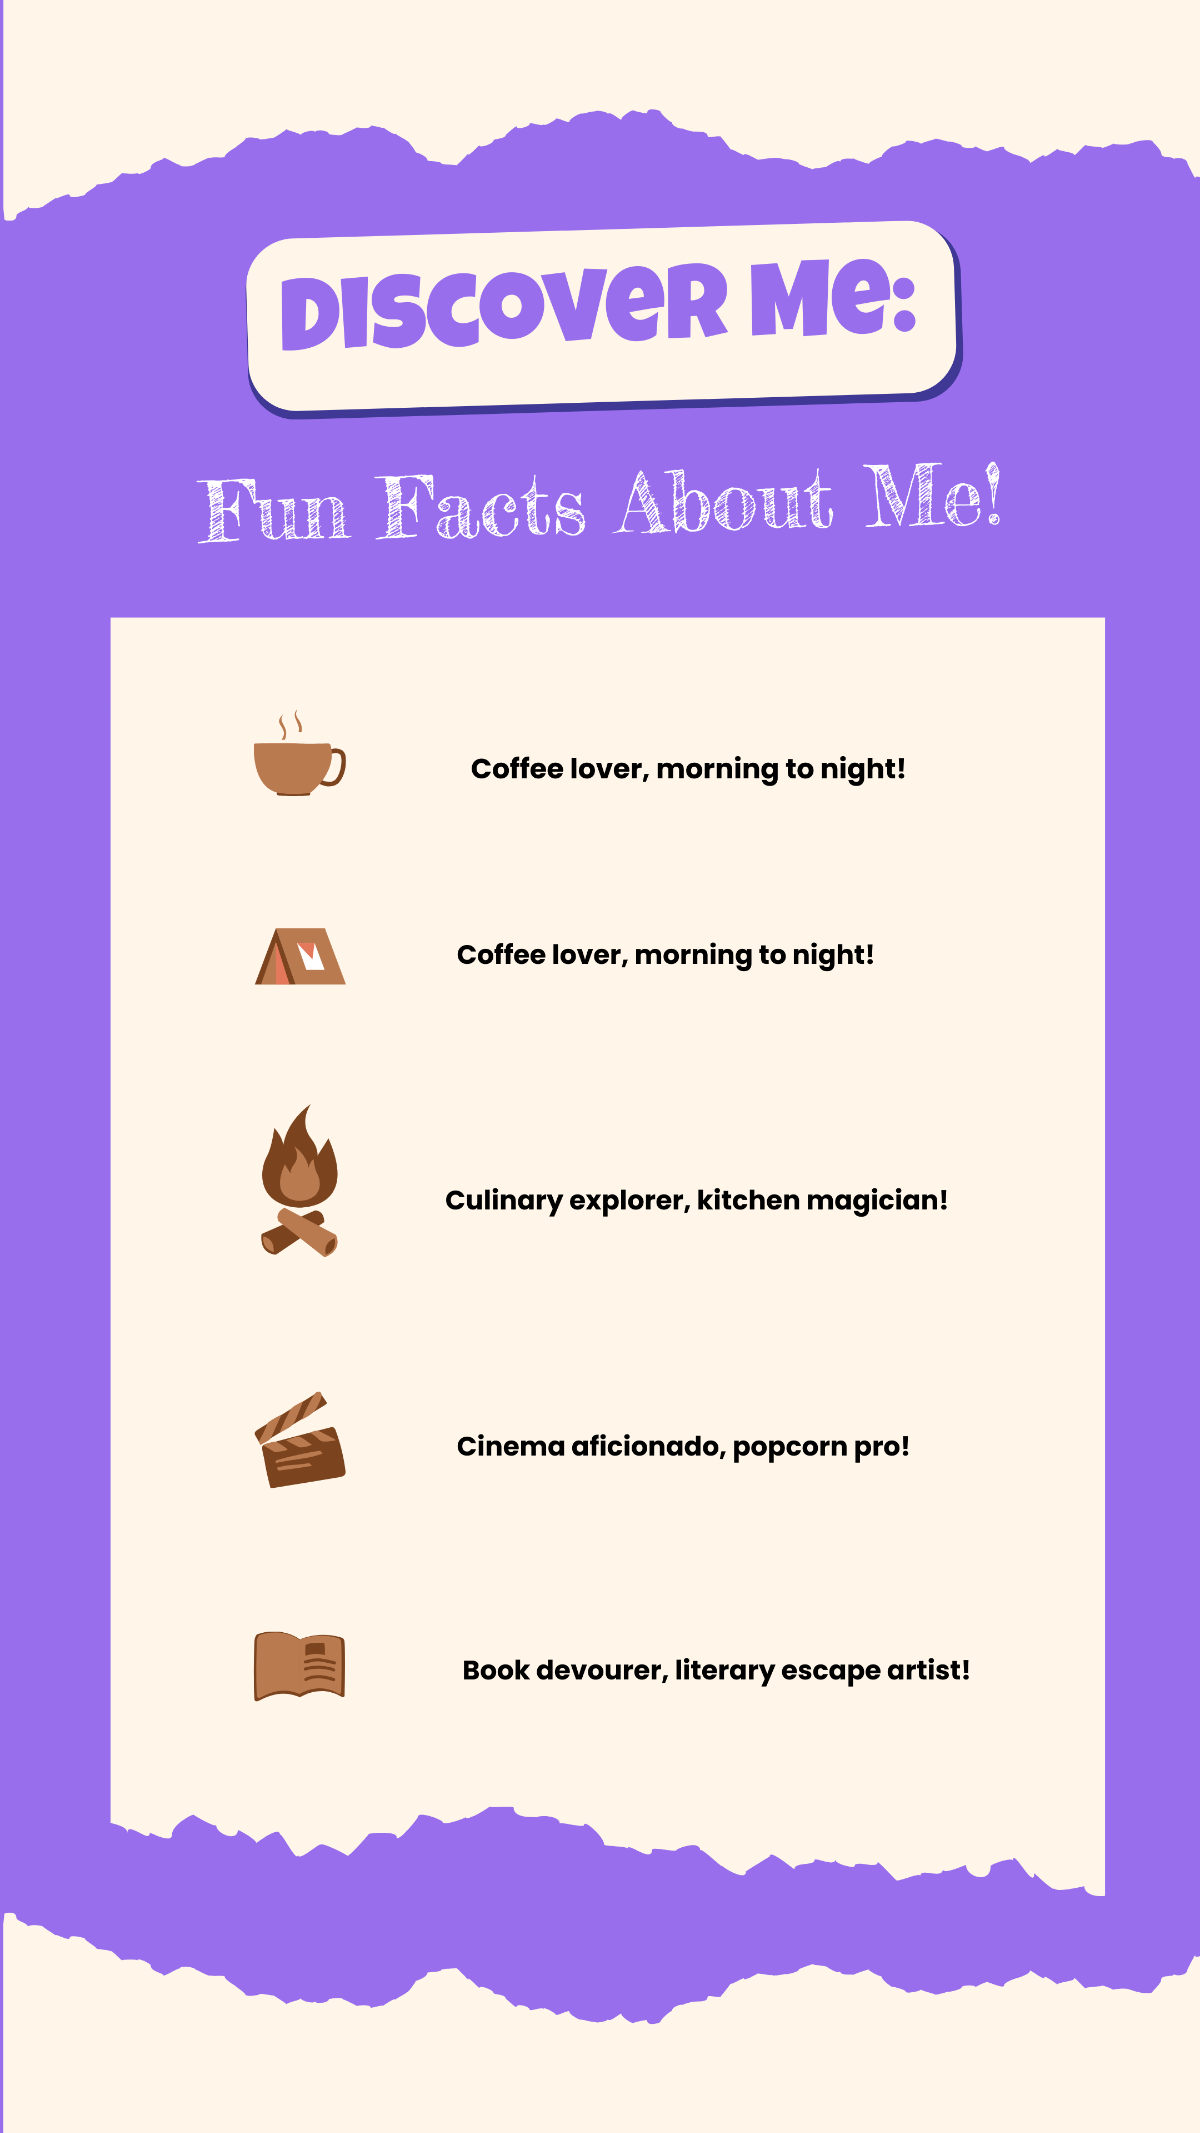 Get to Know Me Fun Facts About Me IG Post